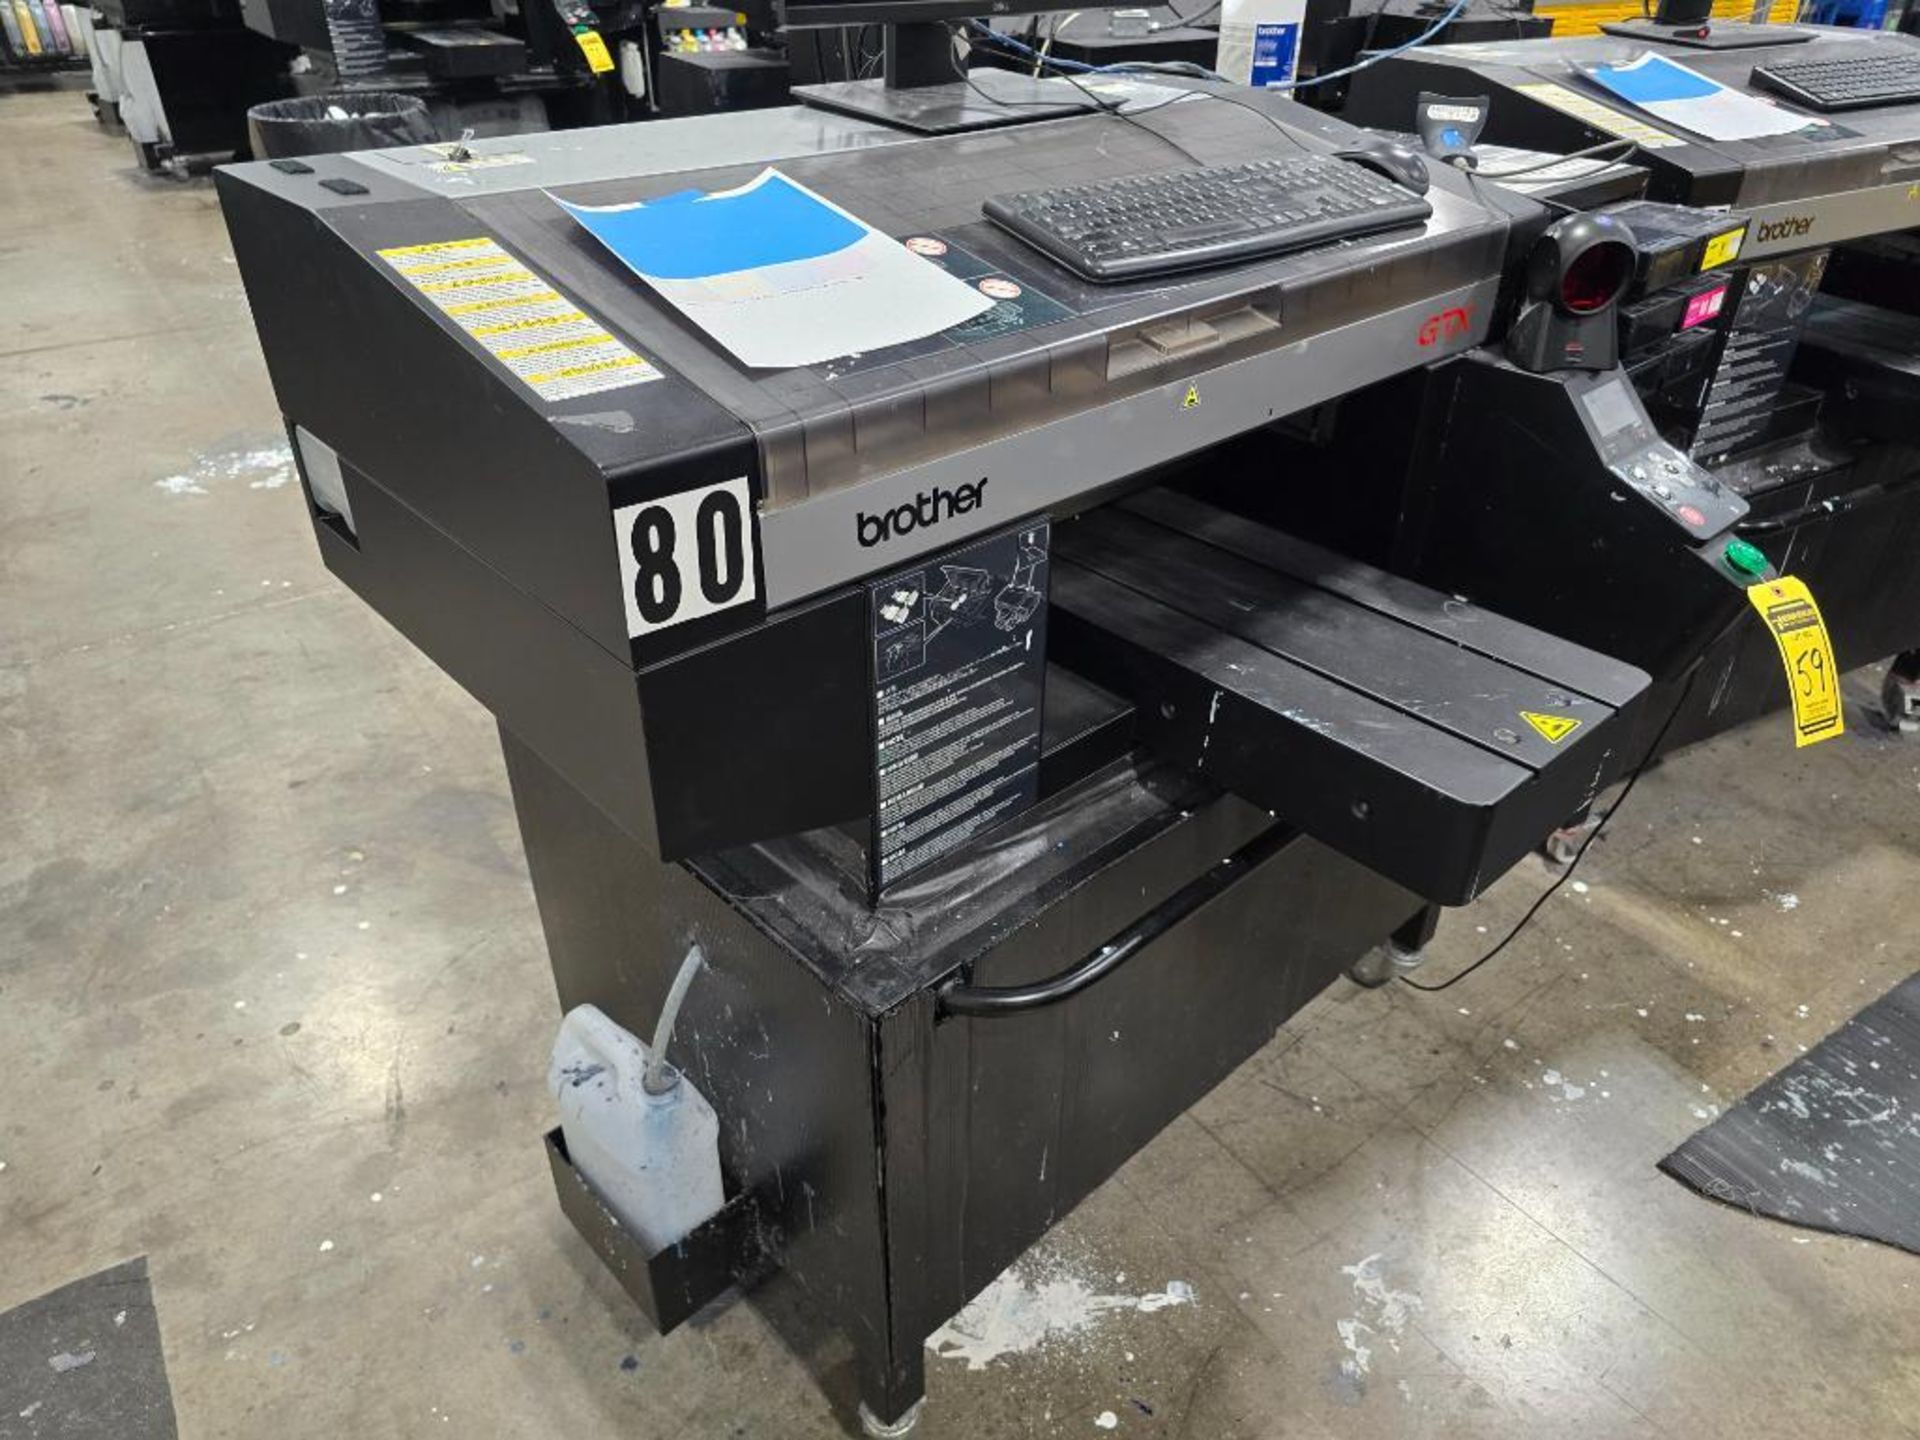 2018 Brother GTX-422 DTG (Direct to Garment) Printer, Twin Head, 6-Color, Textile & Water Based Pigm - Image 2 of 9